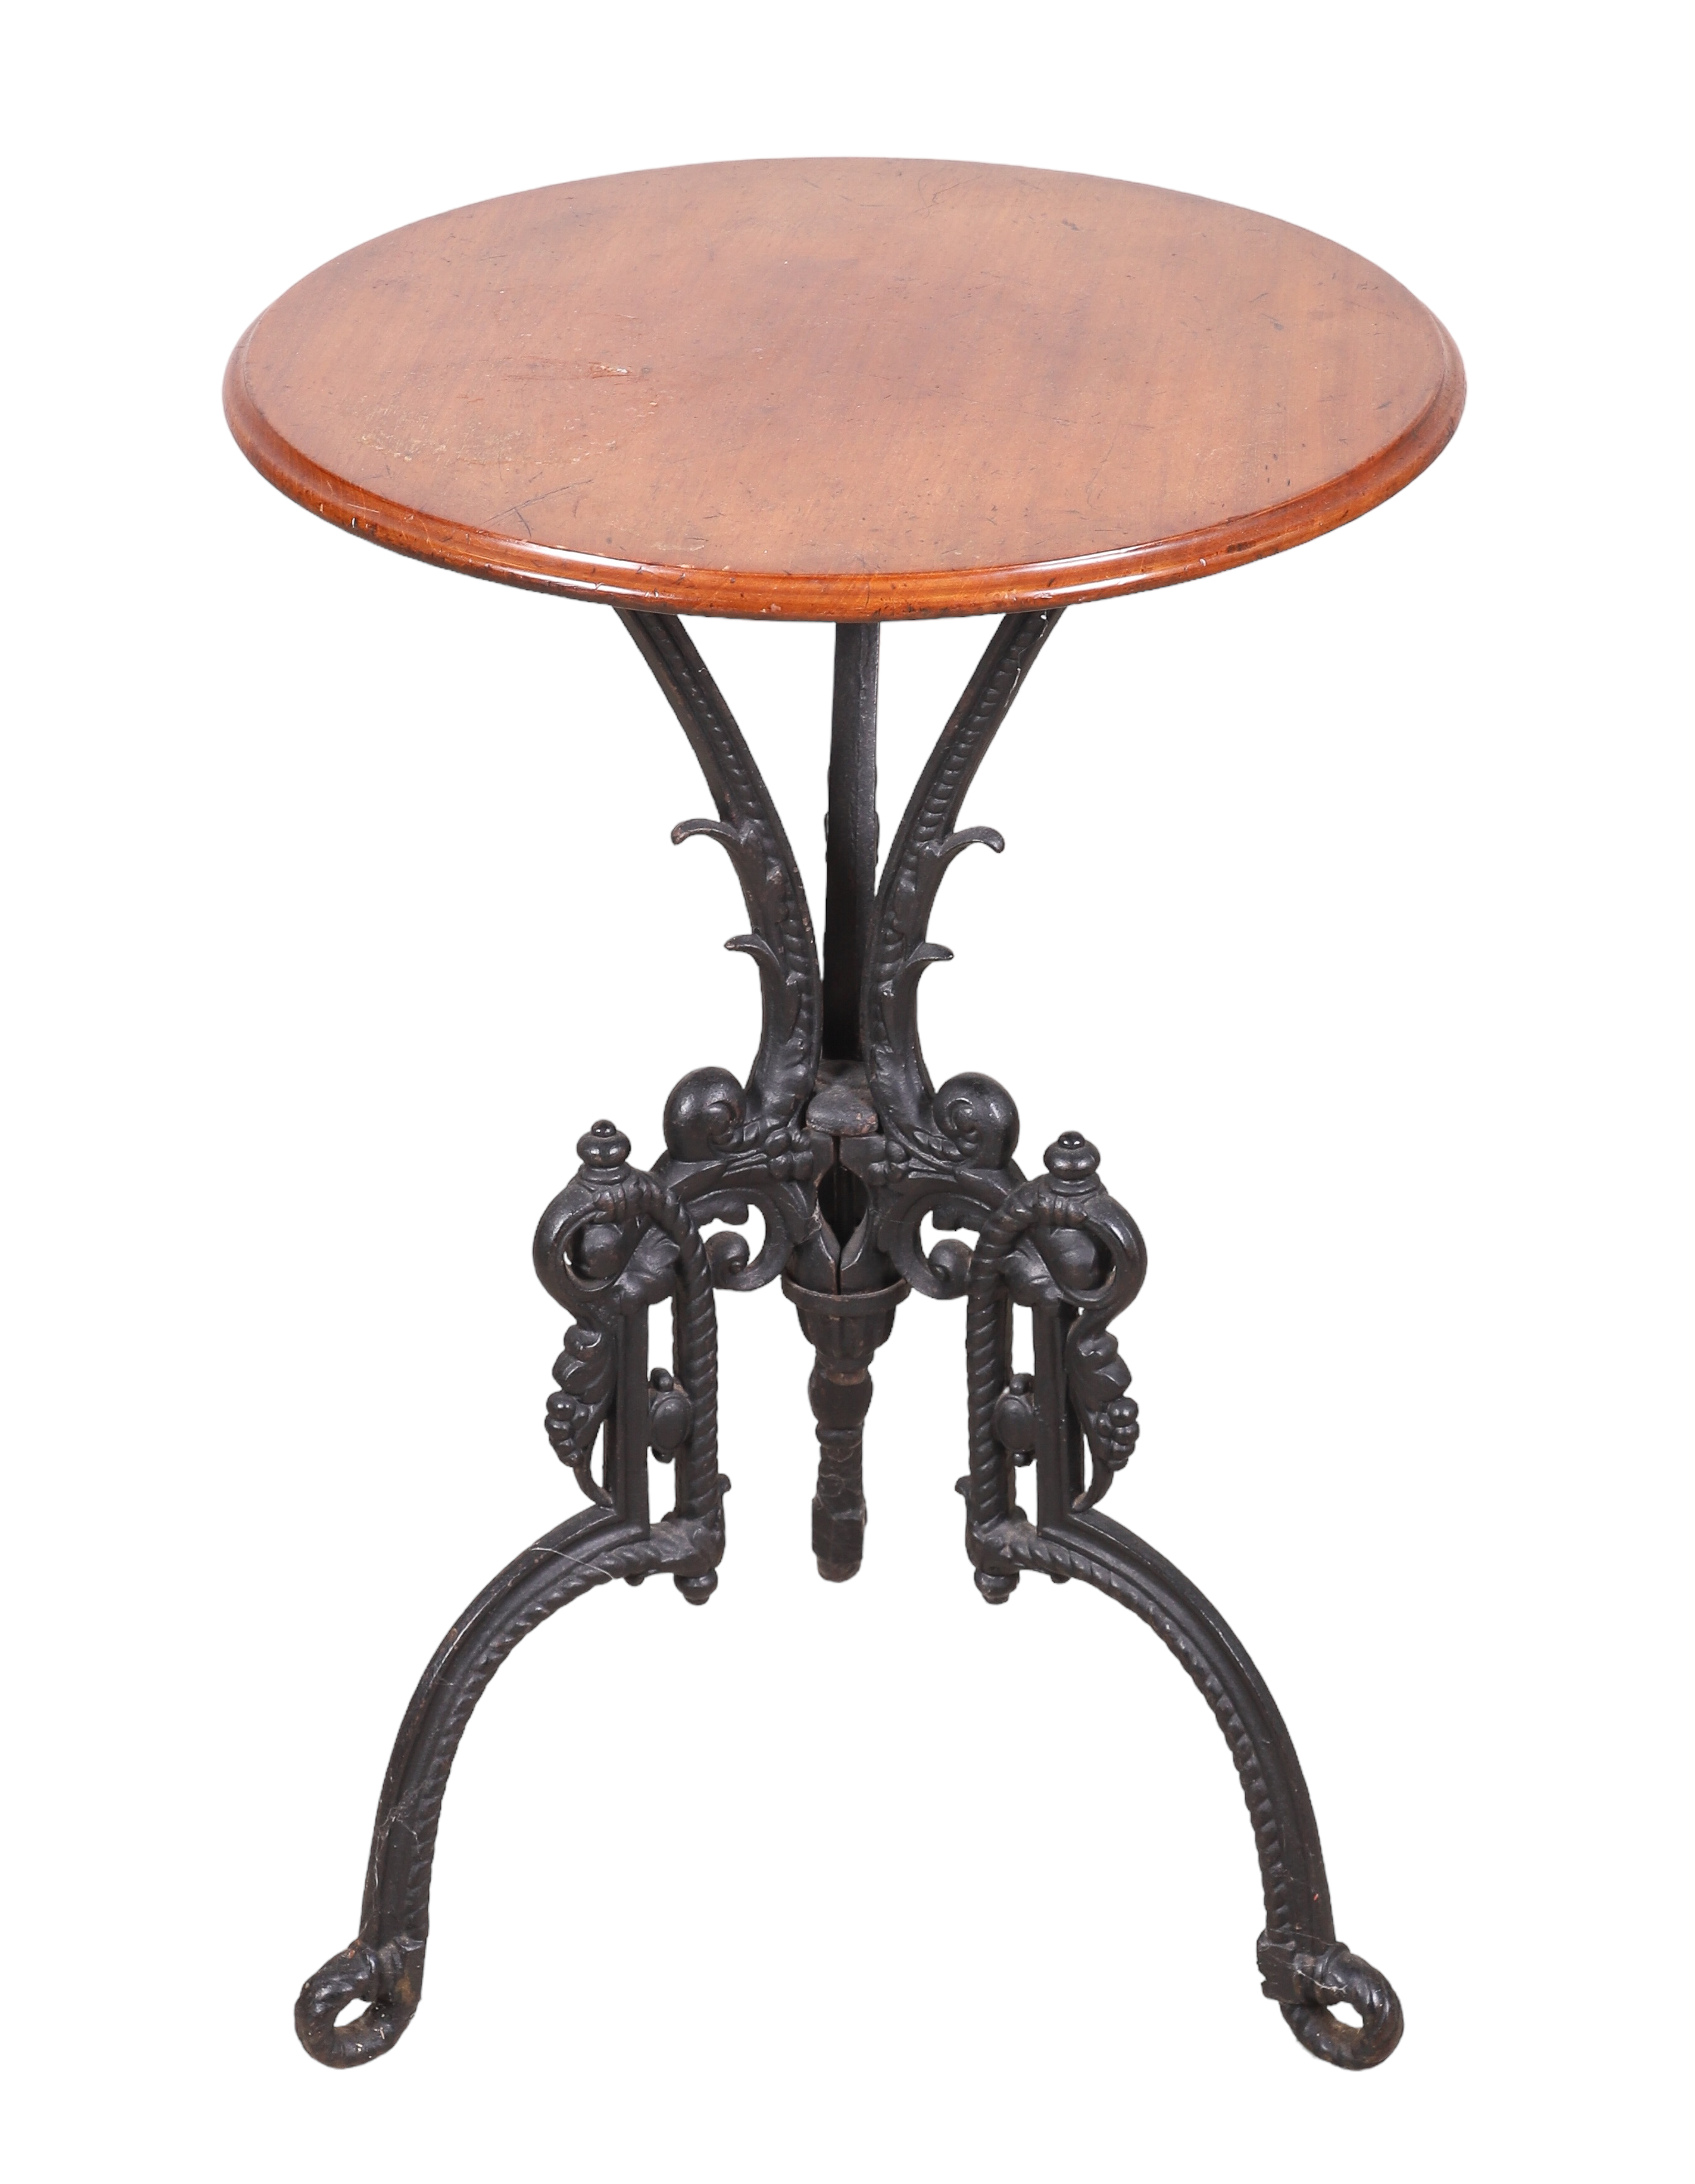 Cherry and iron side table round 3b10d5